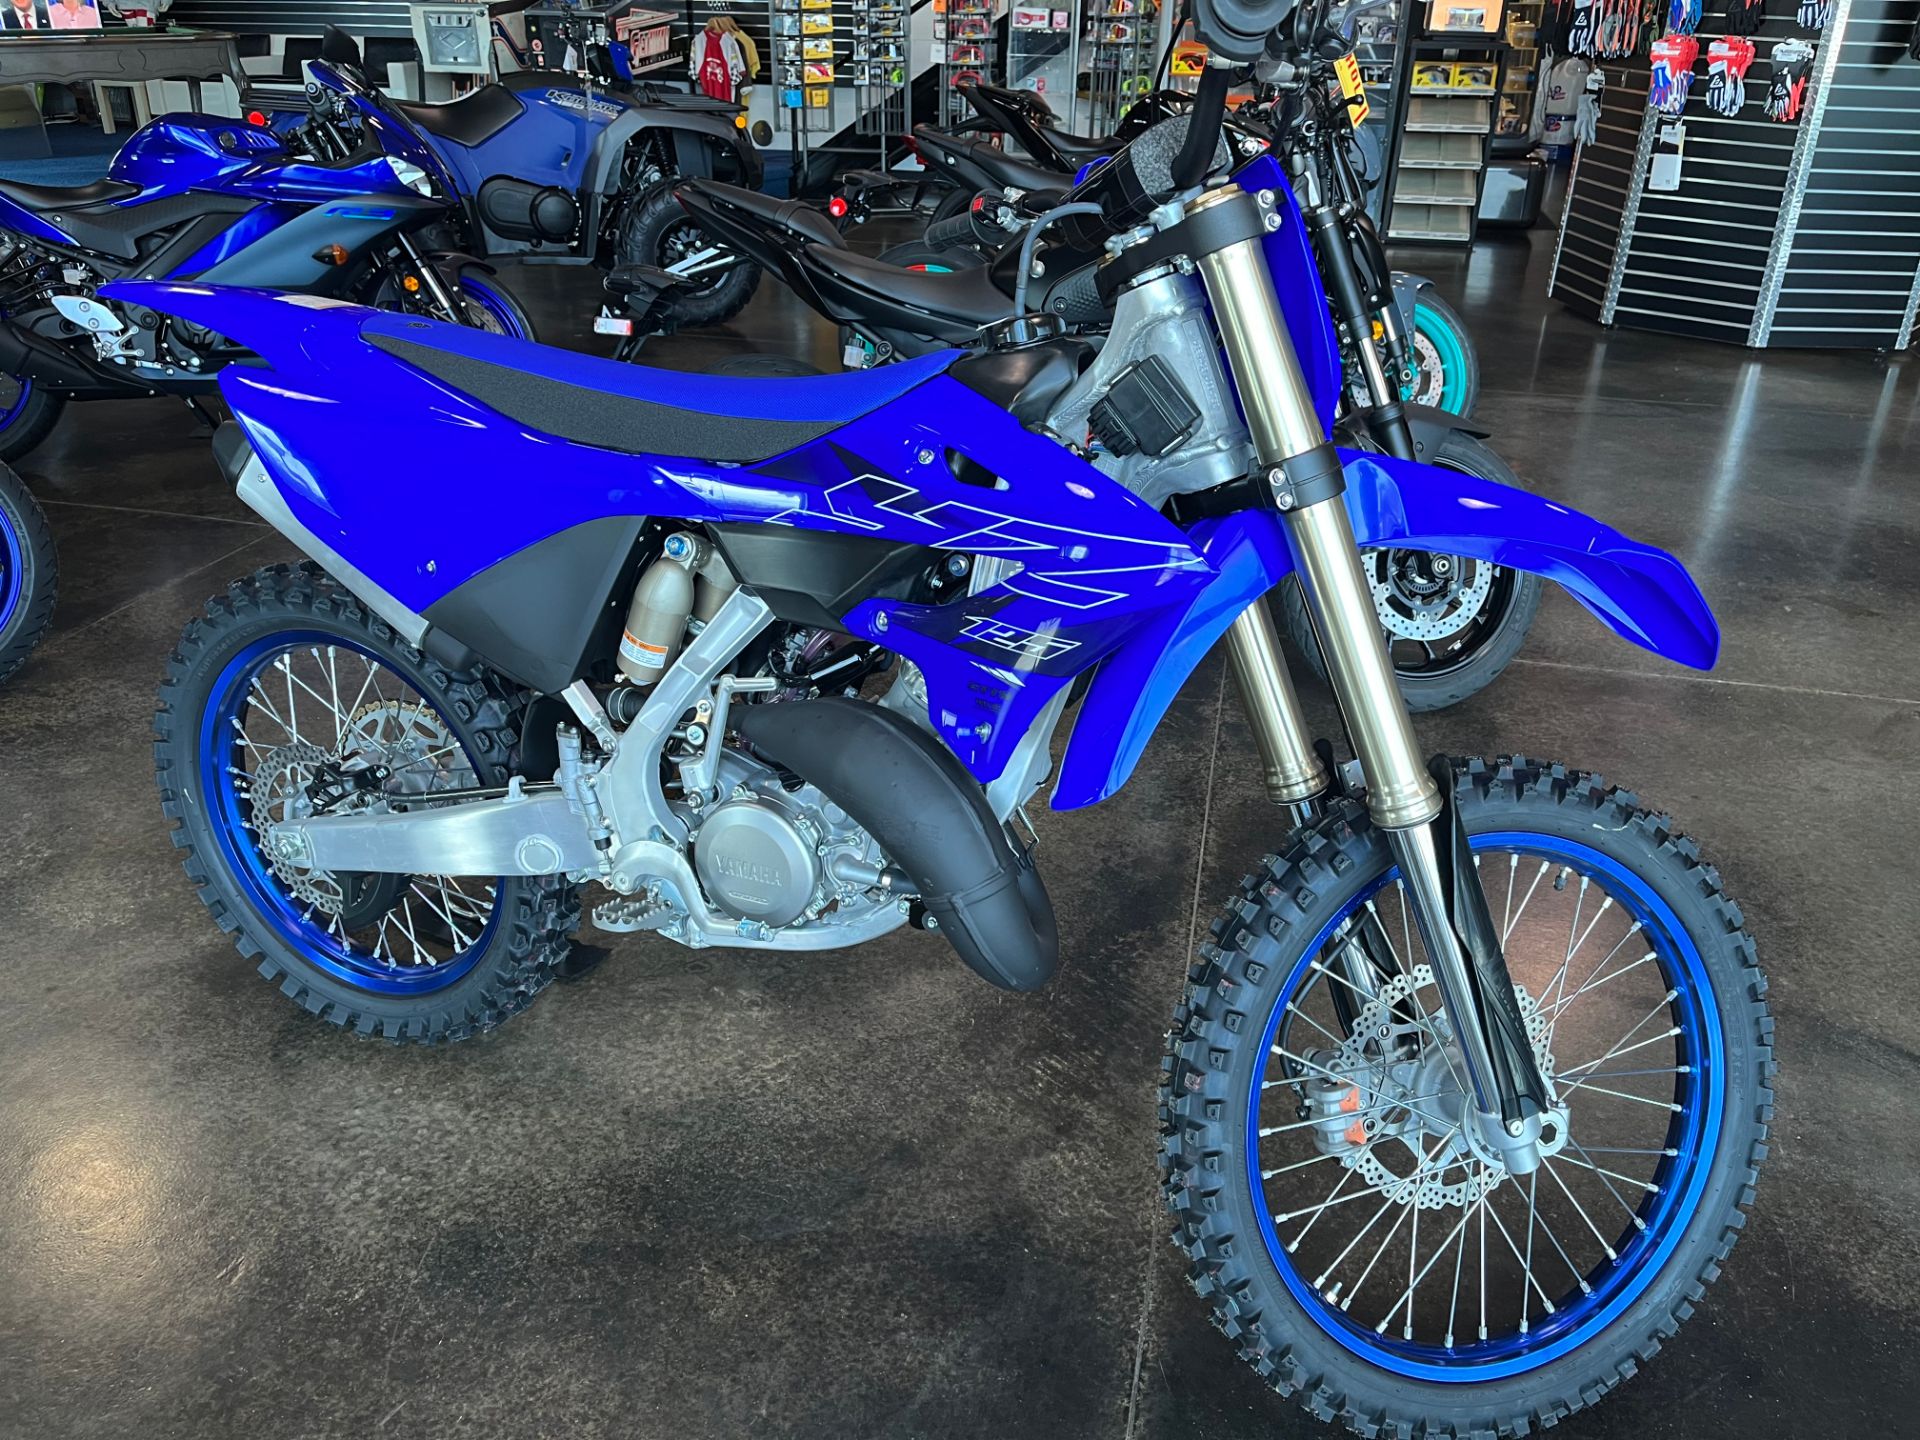 2022 Yamaha YZ125 in Derry, New Hampshire - Photo 1